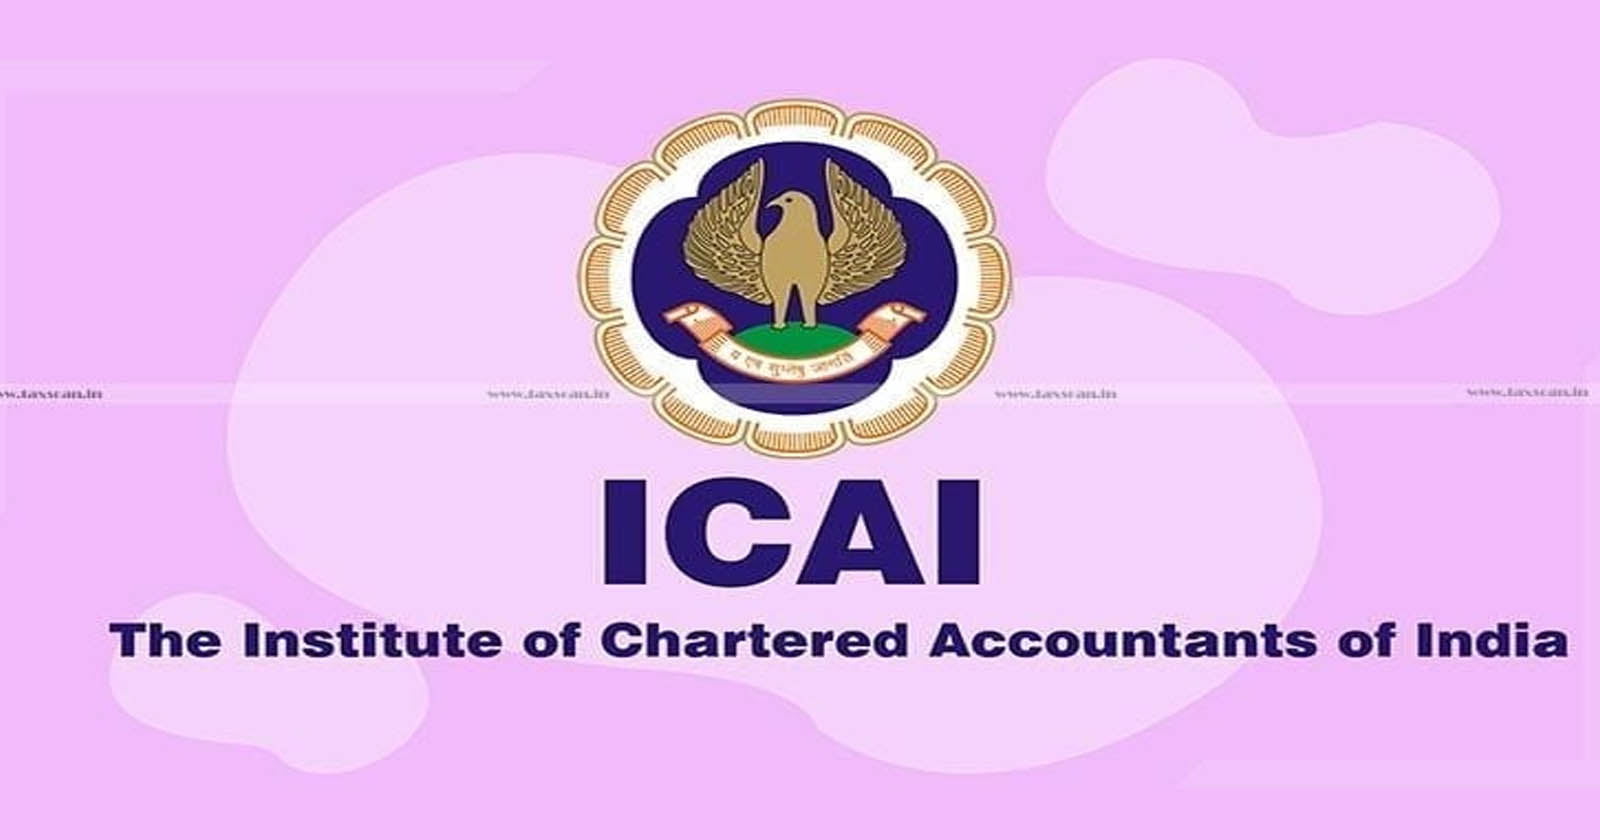 ICAI - convention - Global - Accountants - Institute of Chartered Accountants of India - taxscan